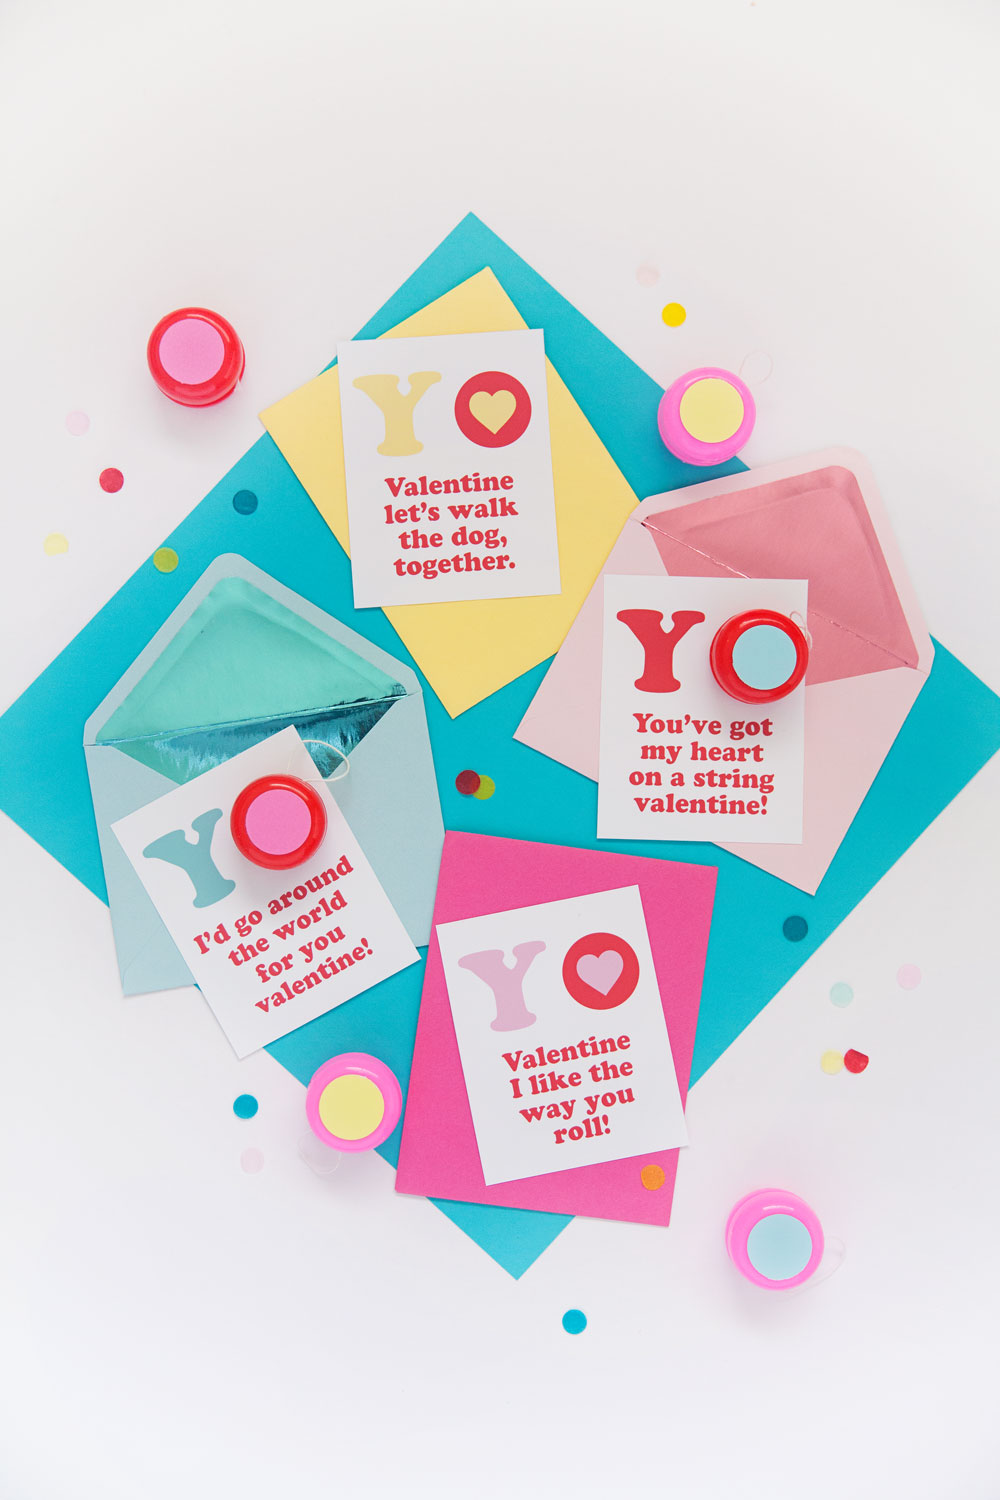 These clever and funny yo-yo valentines are the perfect non candy option his Holiday